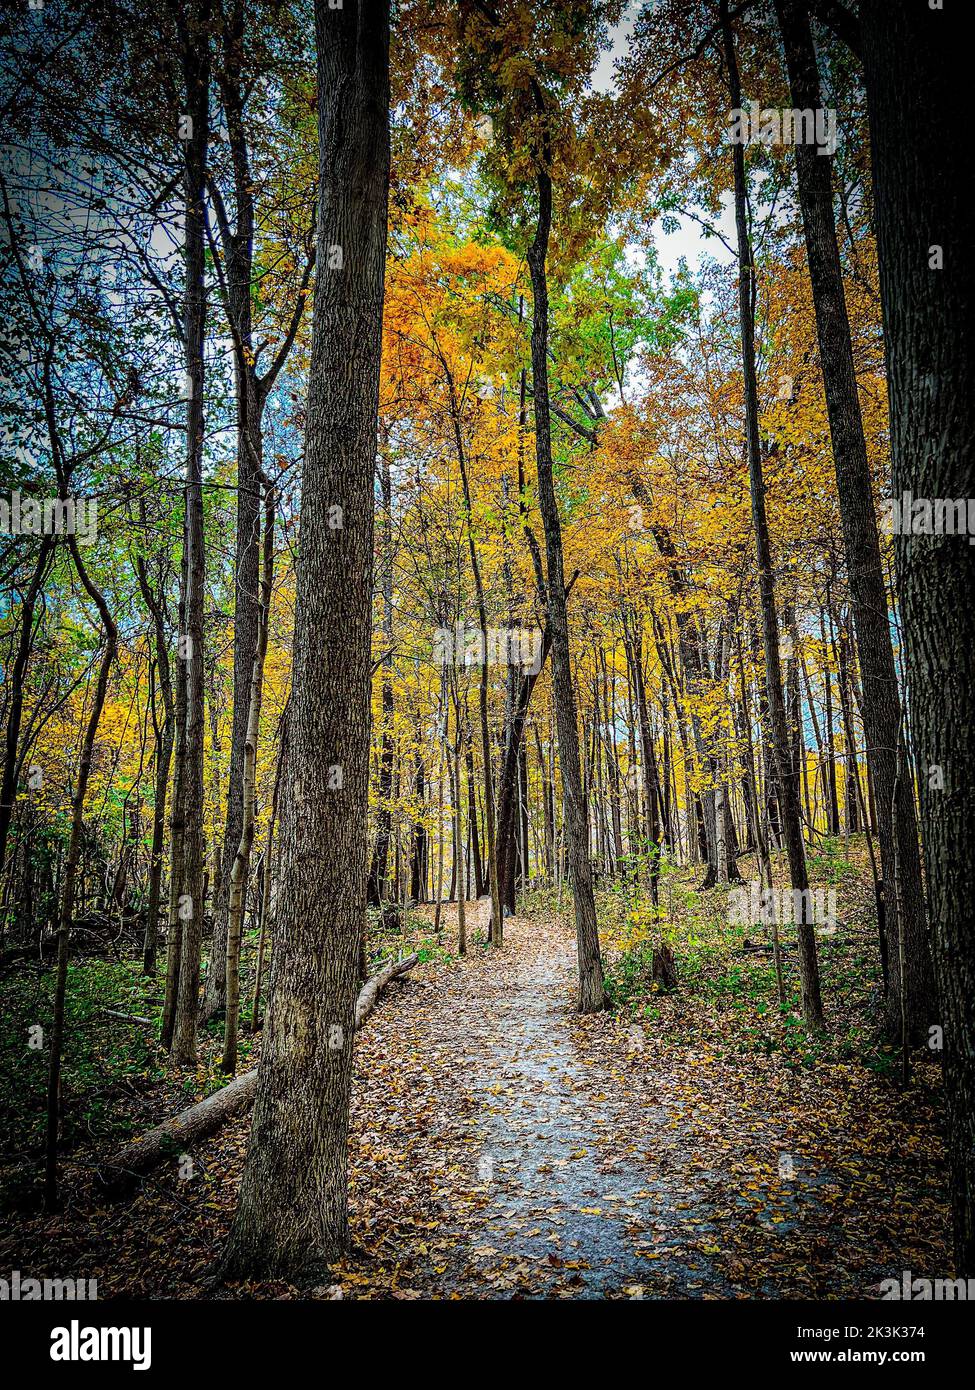 A vertical of a forest trail covered by foliage and surrounded by trees with yellow leaves in autumn Stock Photo